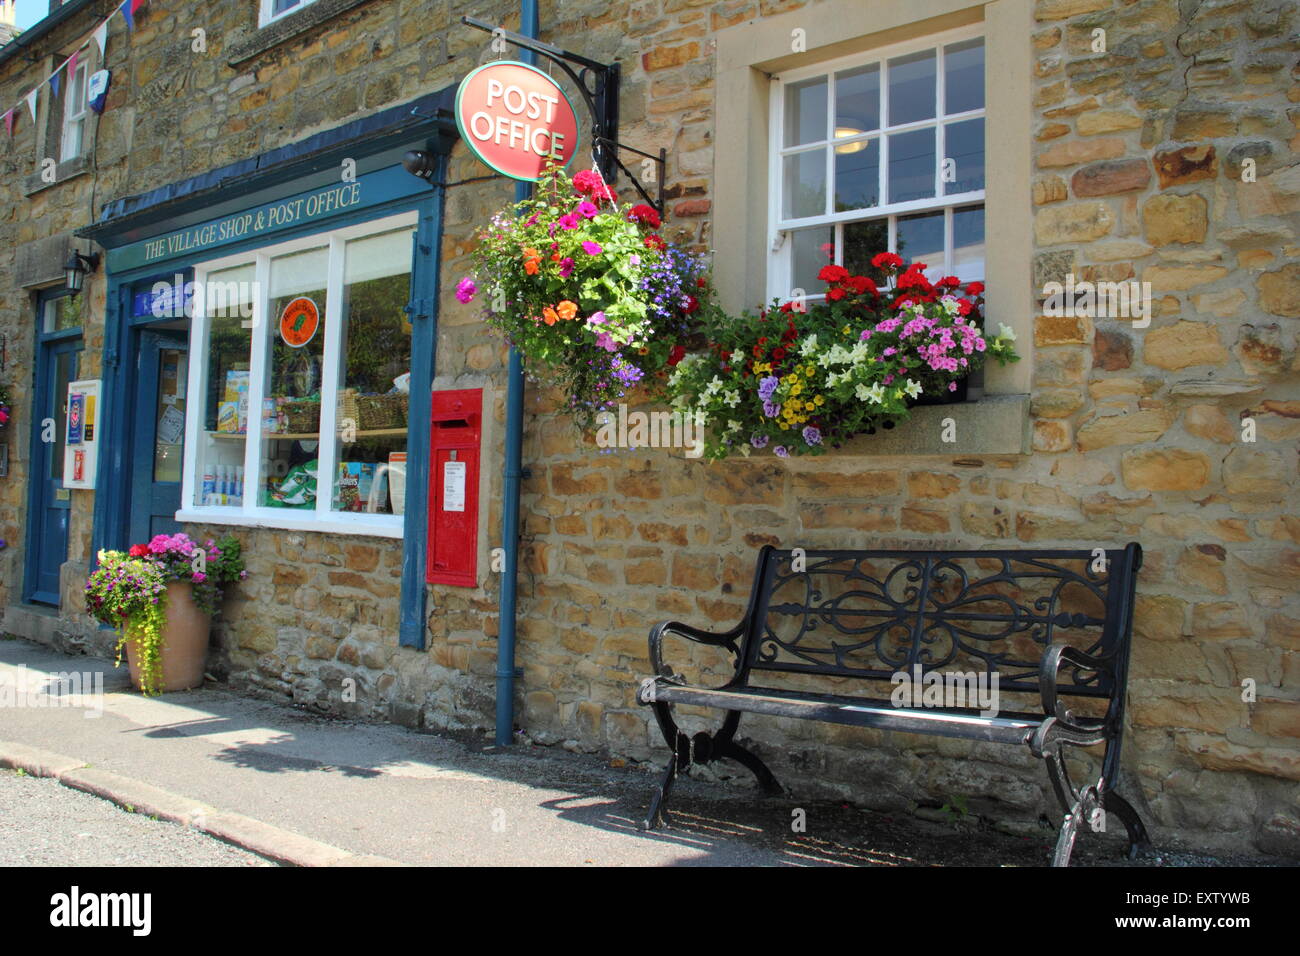 The Village shop and Post Office in Pilsley, a Chatsworth Estate village in the Peak District, Derbyshire England UK Stock Photo